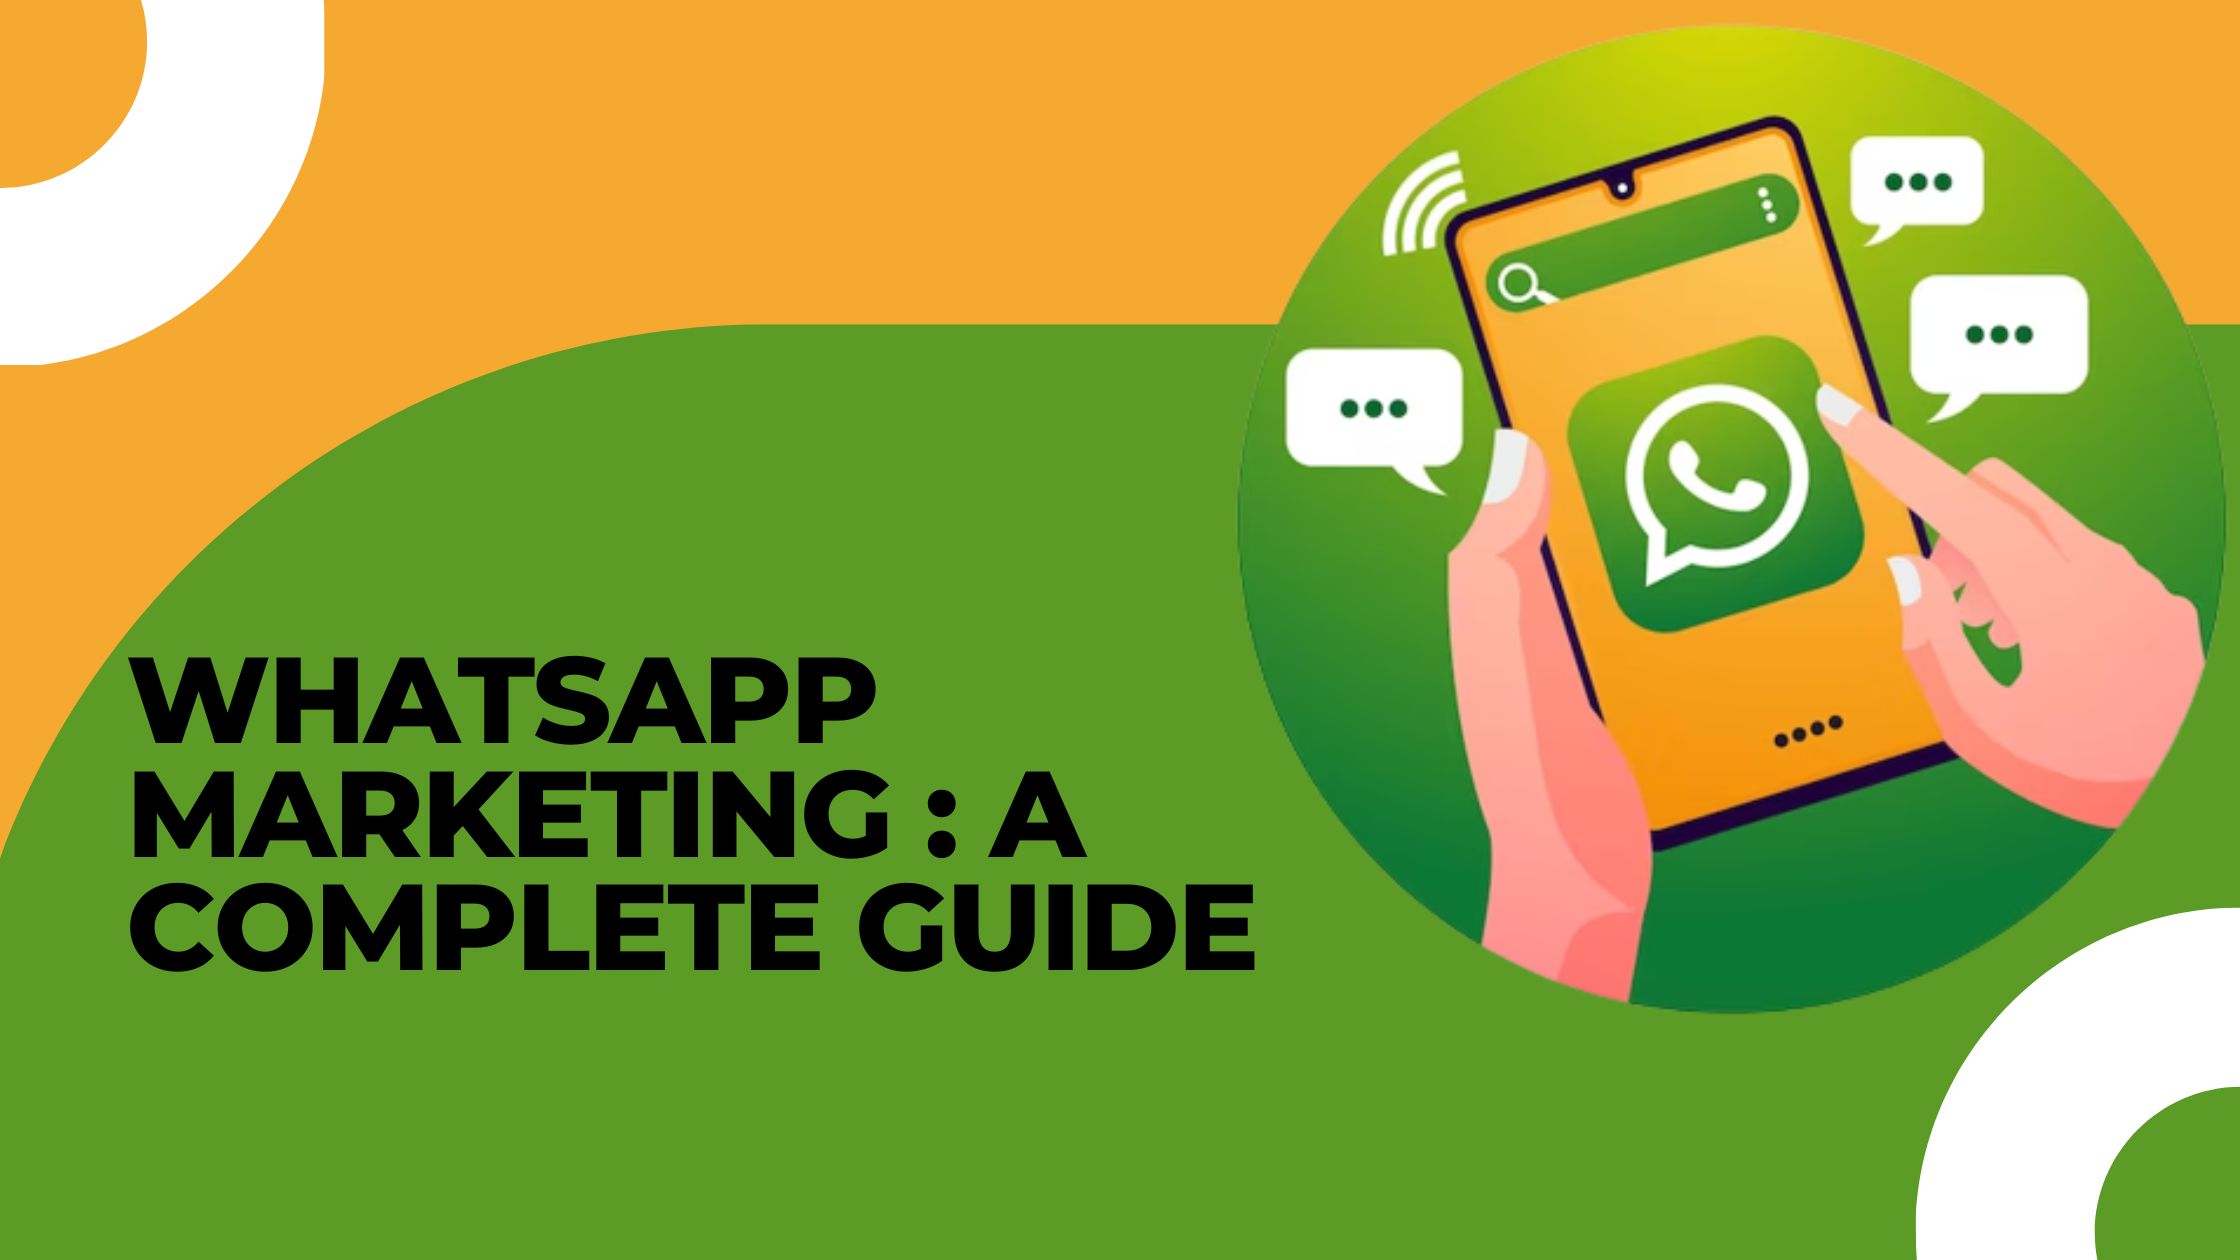 Whatsapp Marketing : A complete guide